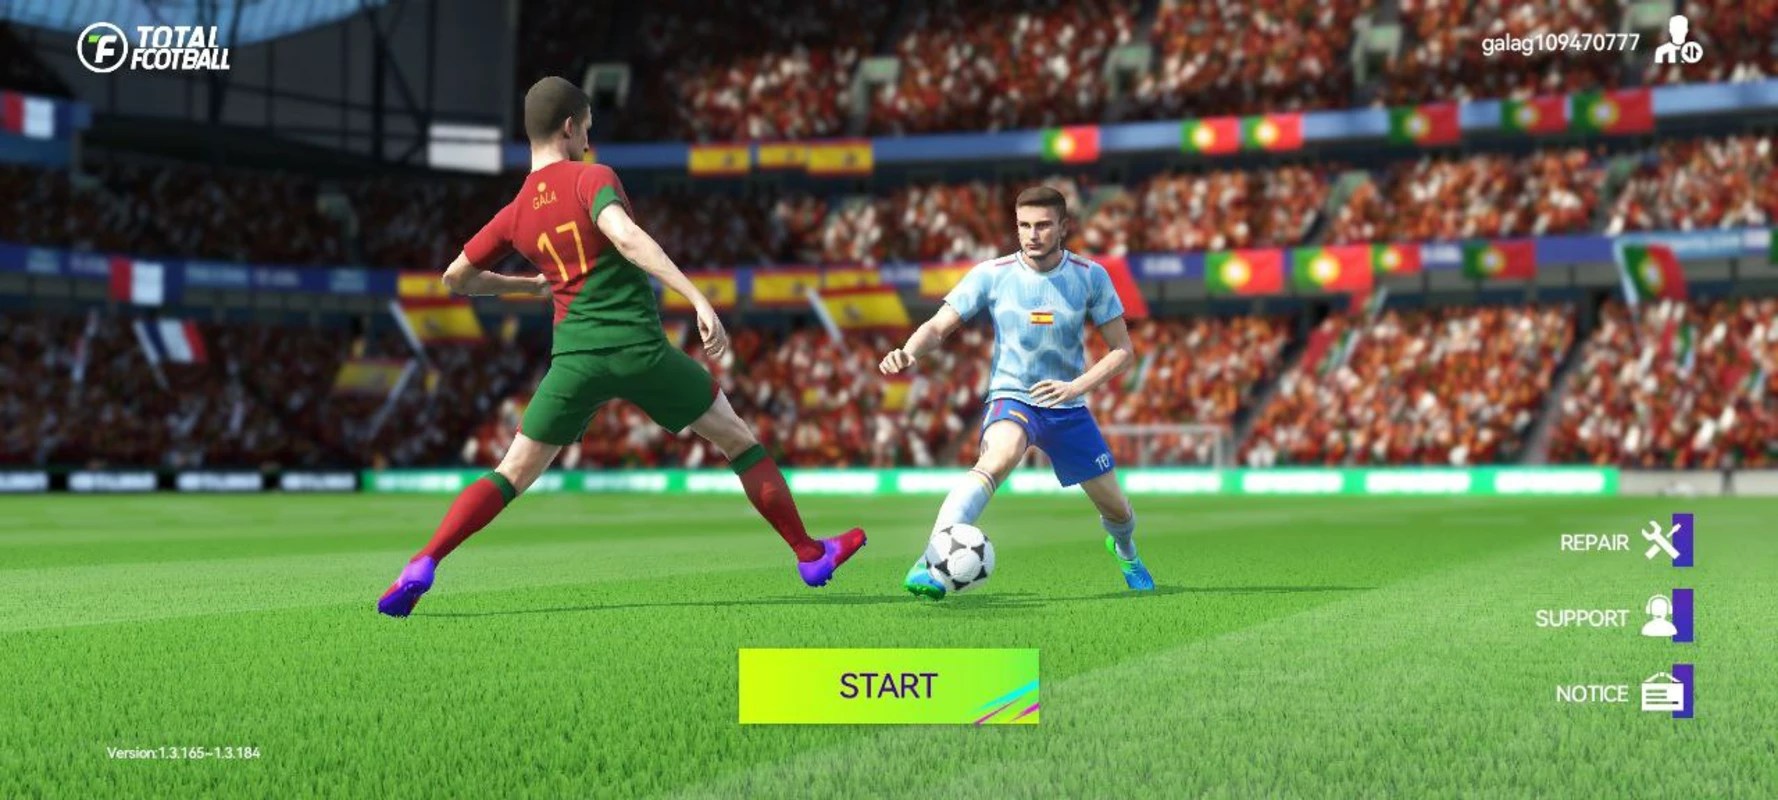 Total Football (Europe) 1.9.108 APK for Android Screenshot 1